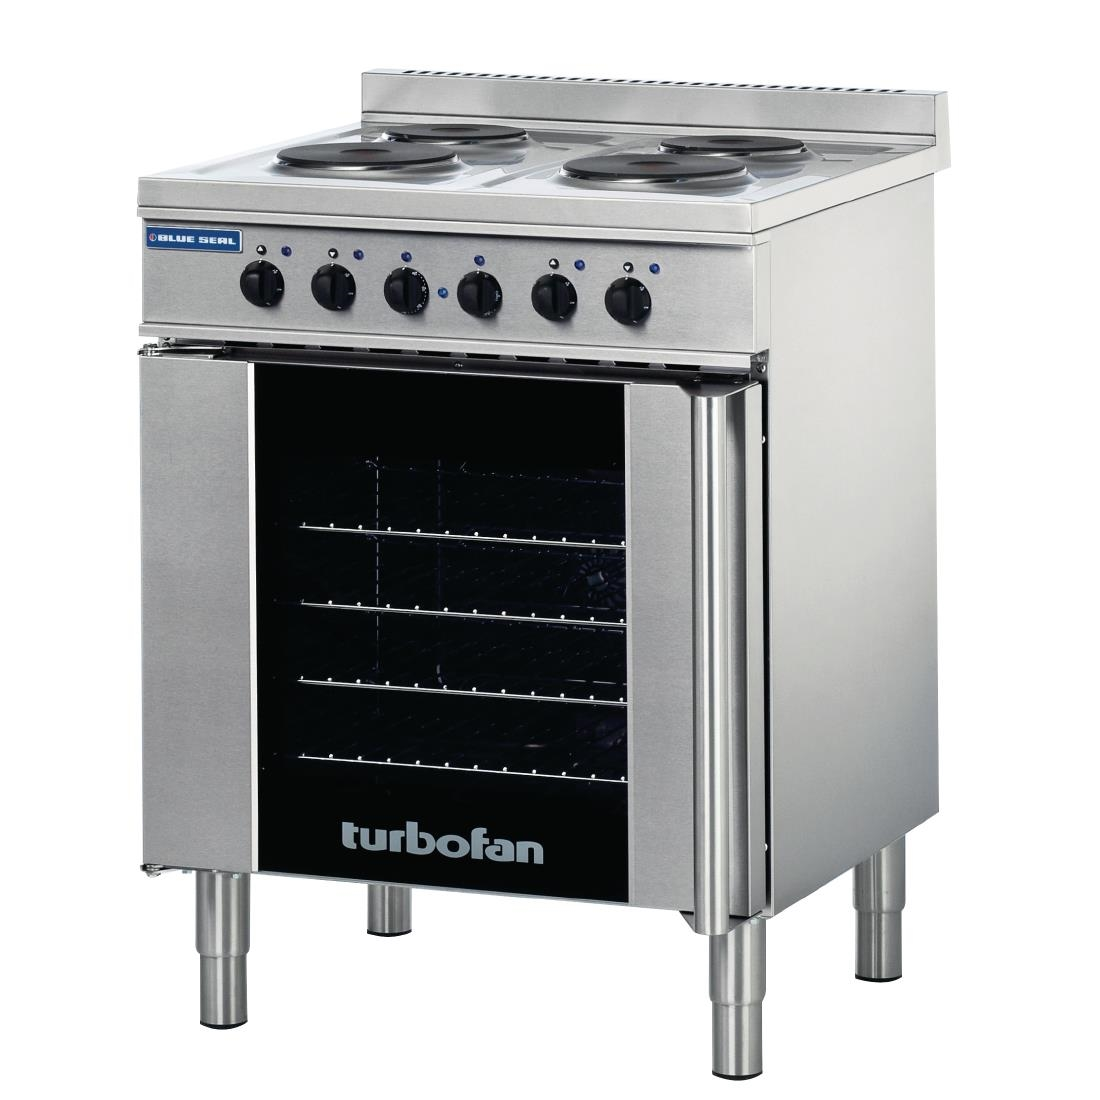 Blue Seal Turbofan Convection Oven E931M JD Catering Equipment Solutions Ltd